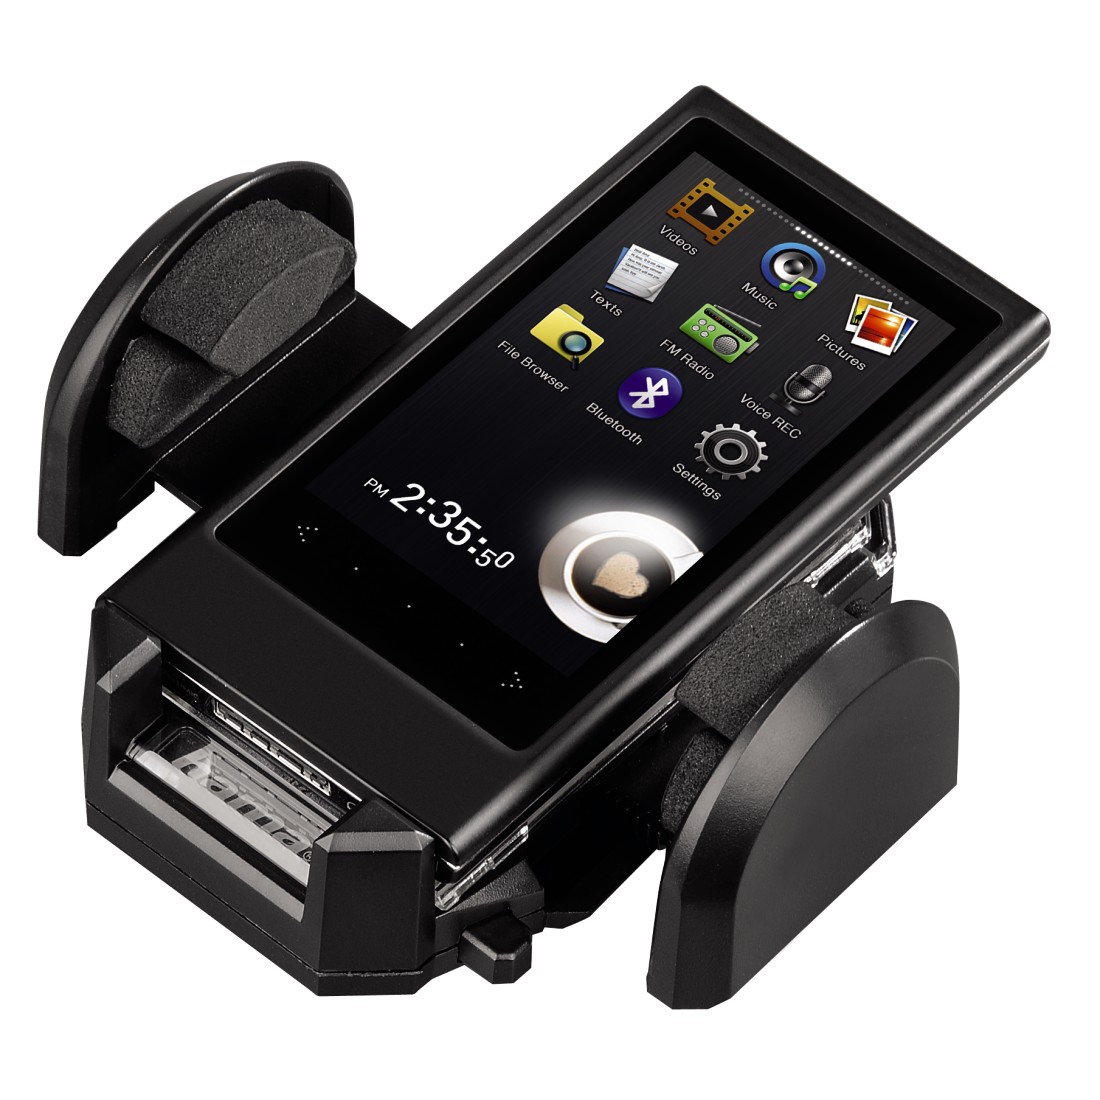 We - WE Support universel smartphone pour voiture - Fixation